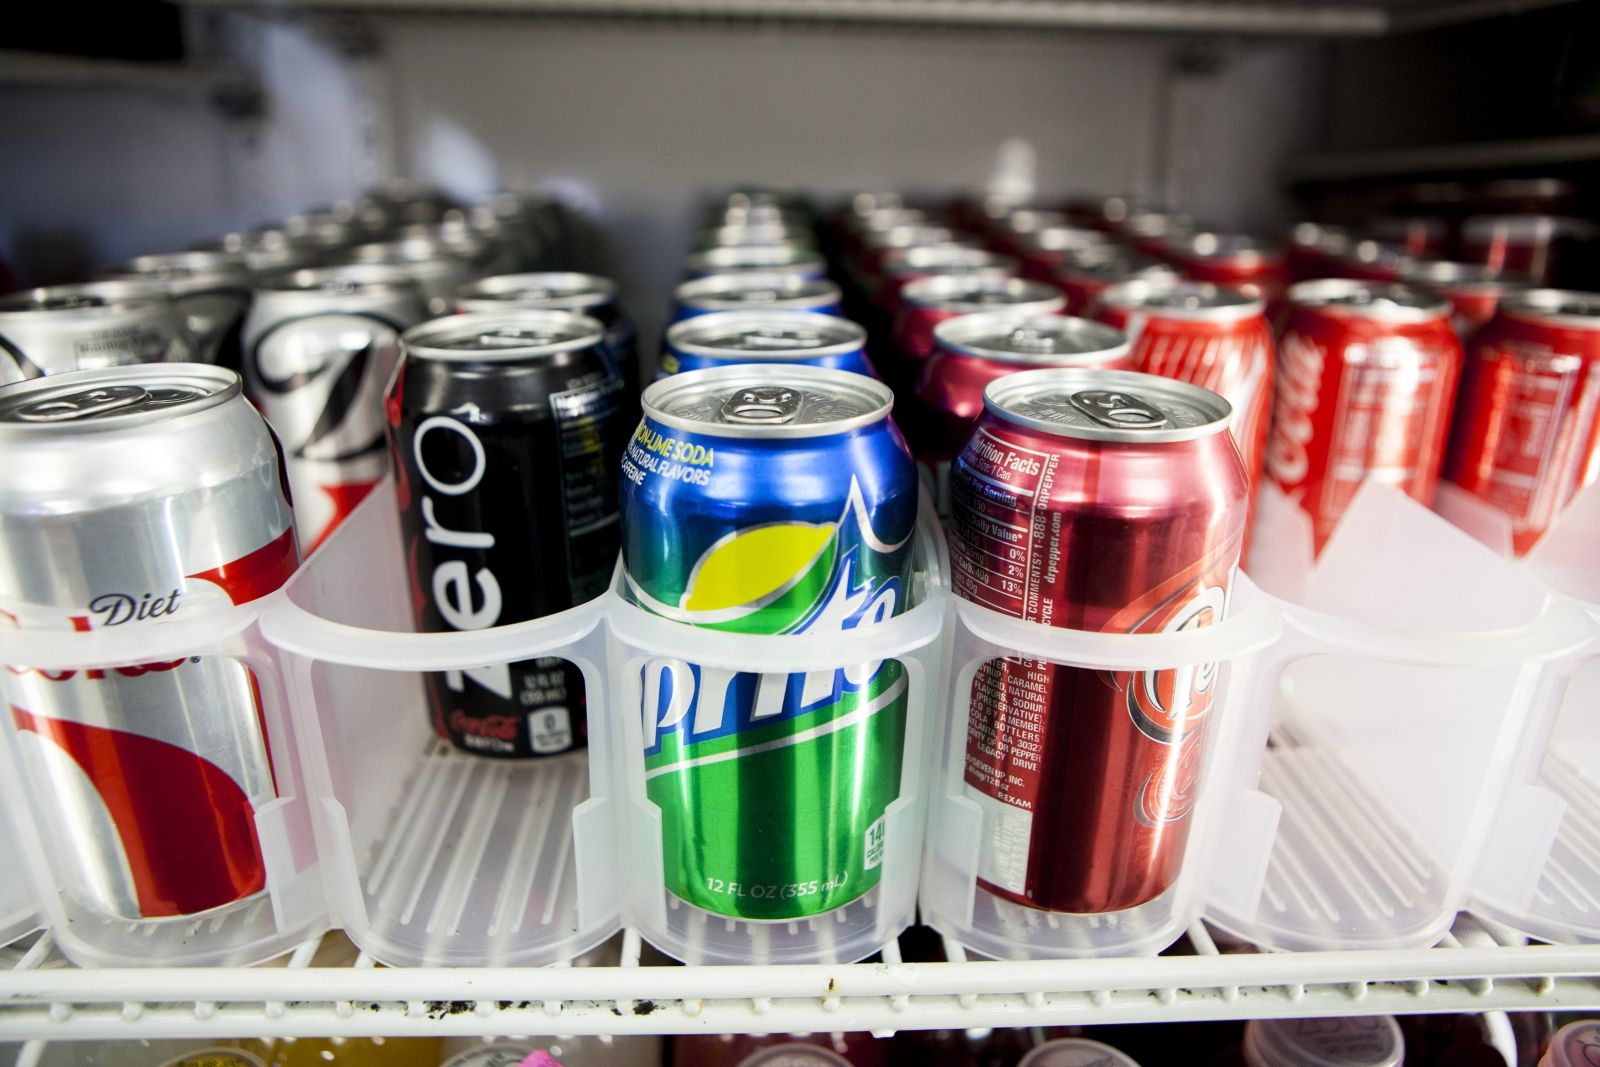 The link between sugary drinks and cardiovascular disease